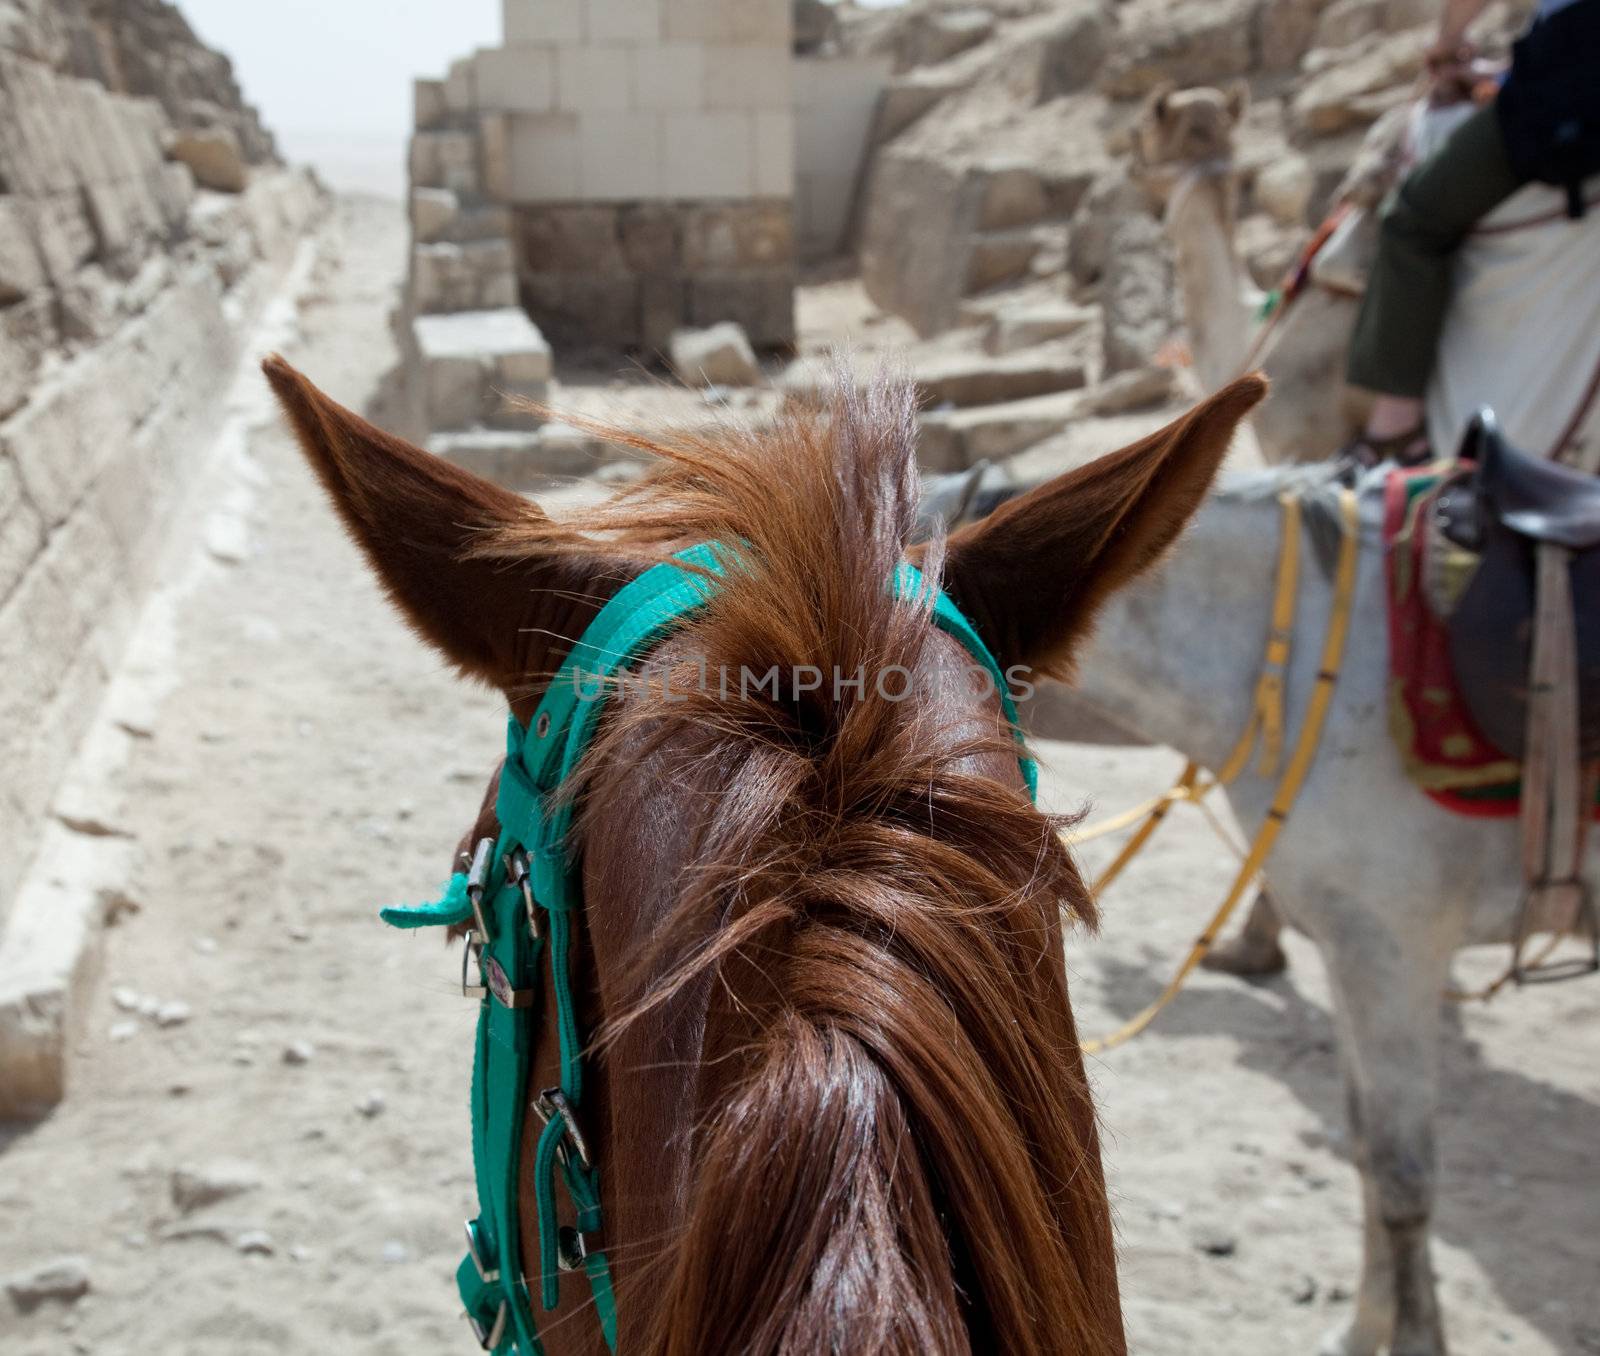 On horse ride by the pyramids in Cairo by steheap